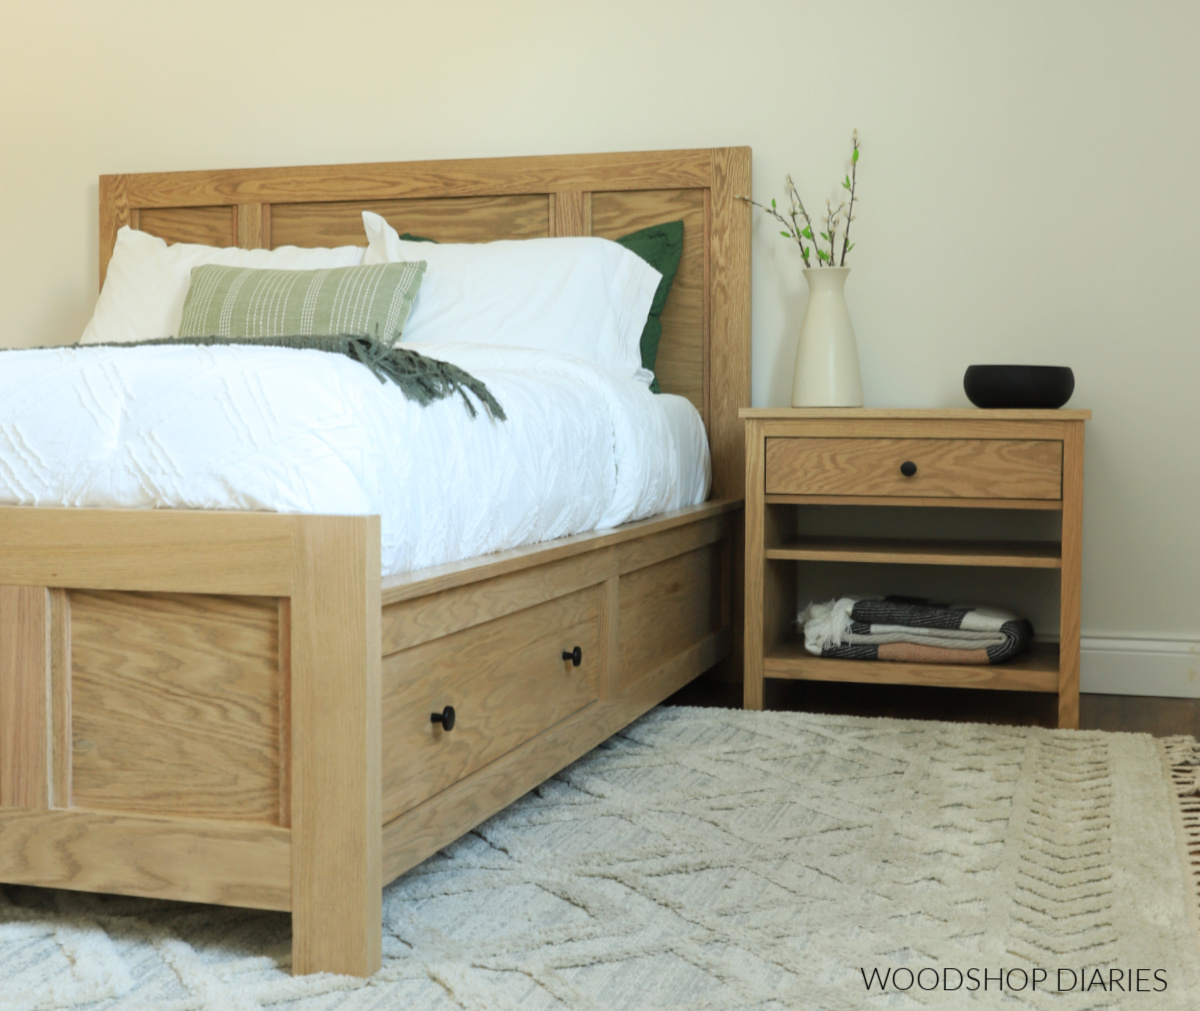 matching storage bed and nightstands to go with this DIY dresser build project